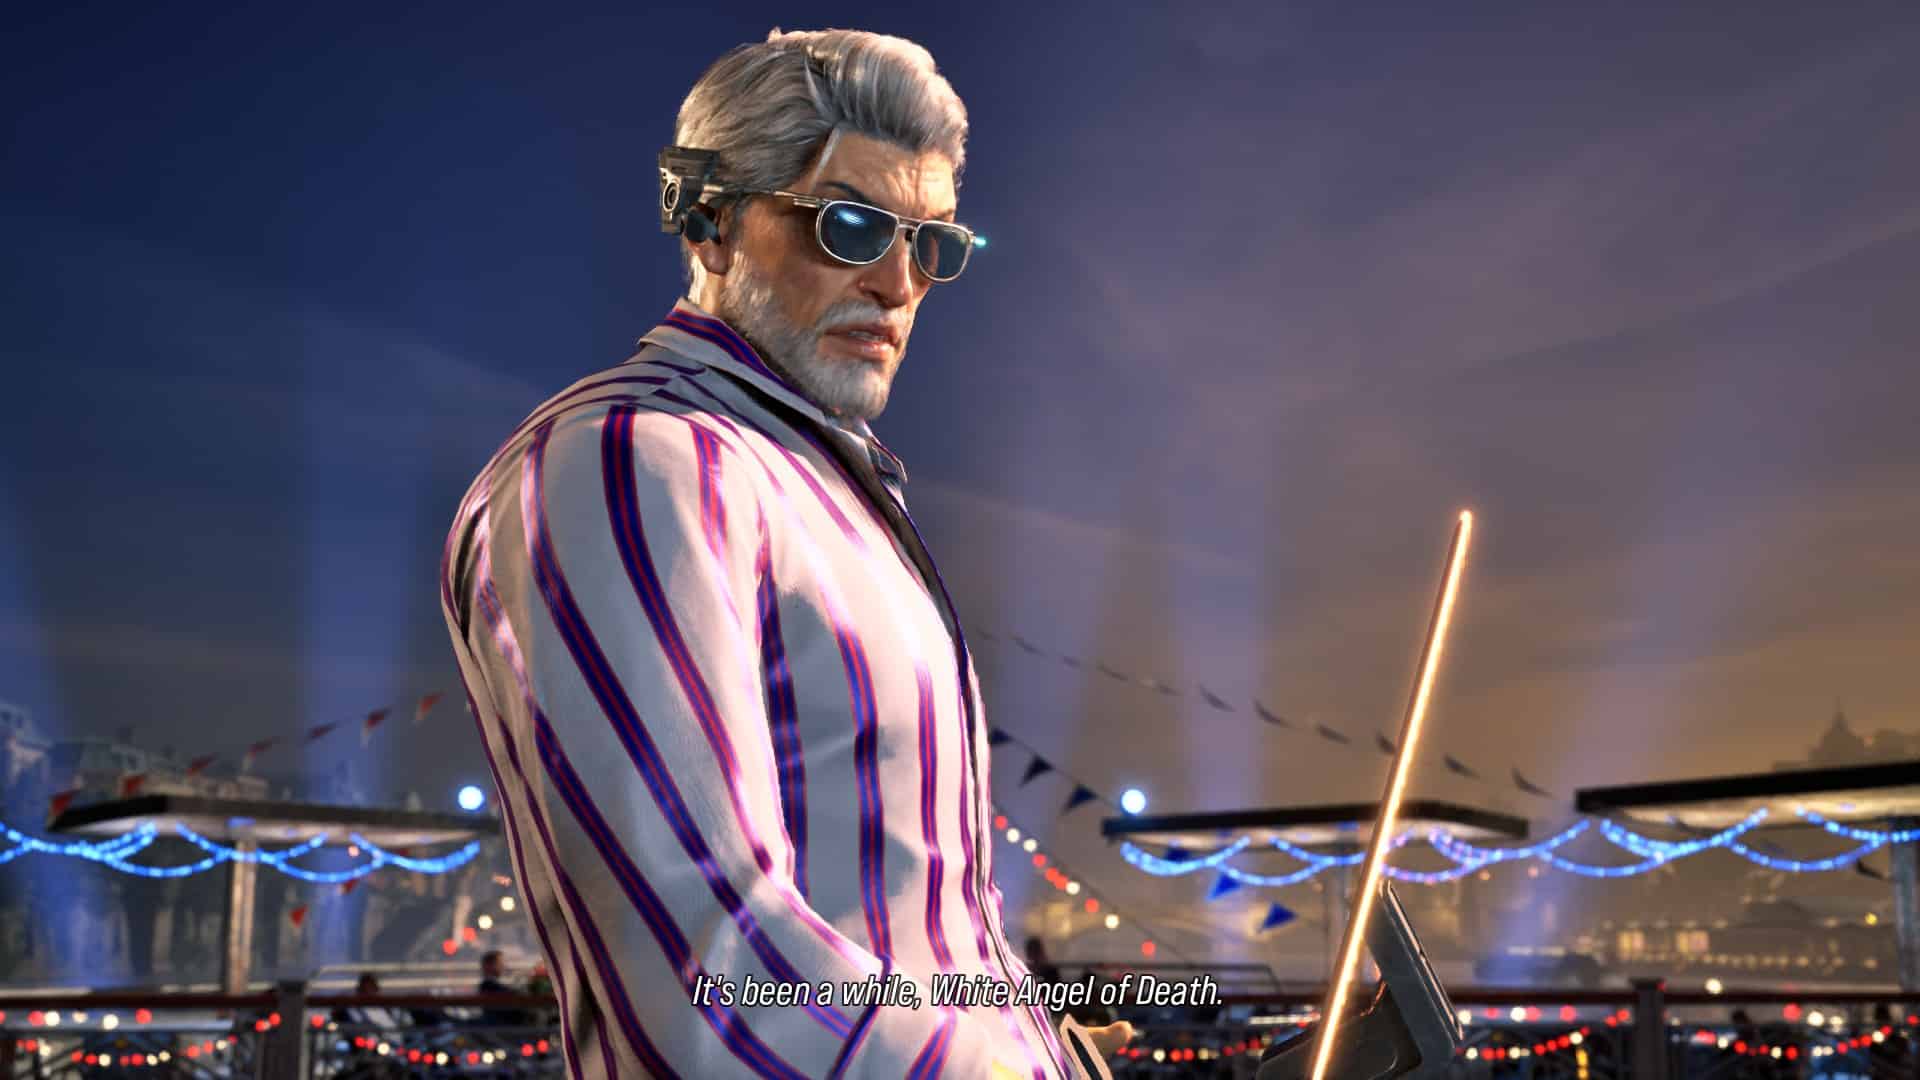 In the world of Tekken 8, a fierce fighter in a striped suit confidently wields a powerful bat with skill and precision.